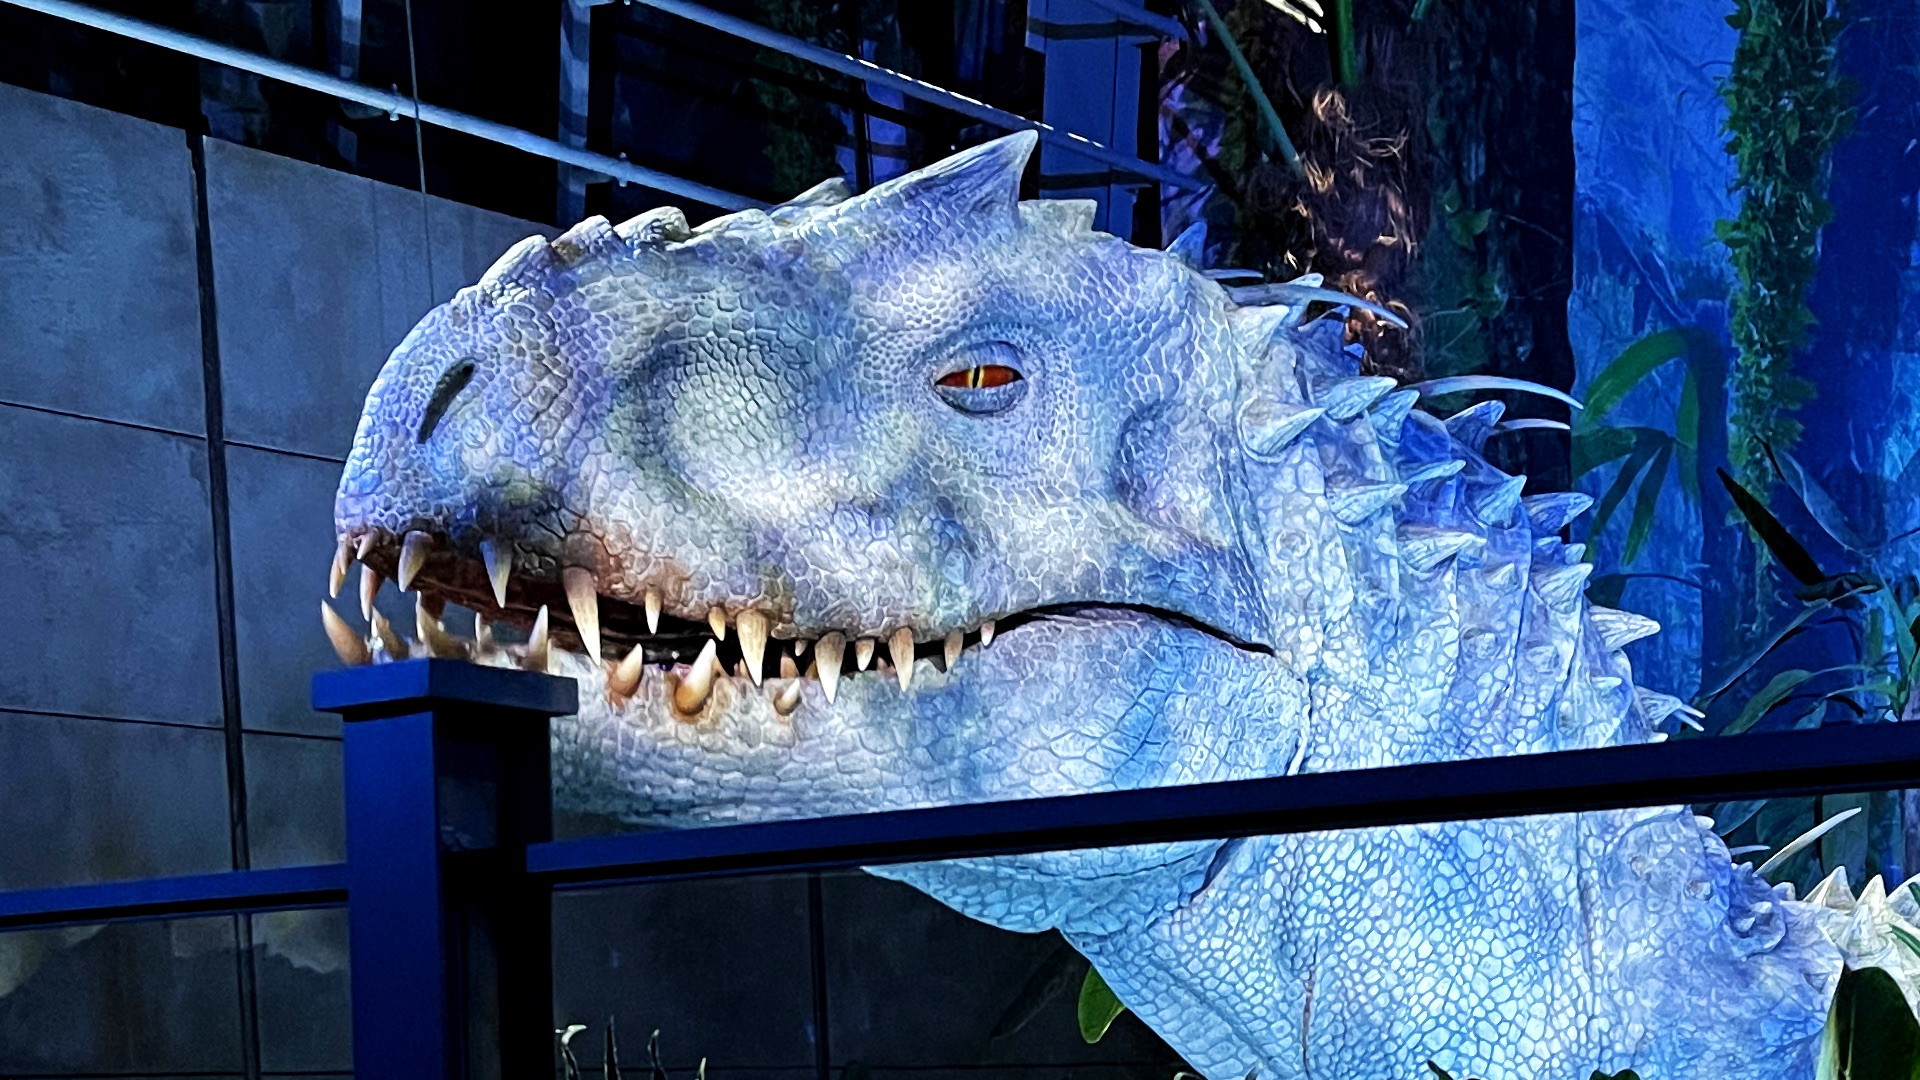 Official Site of Jurassic World: The Exhibition in San Diego